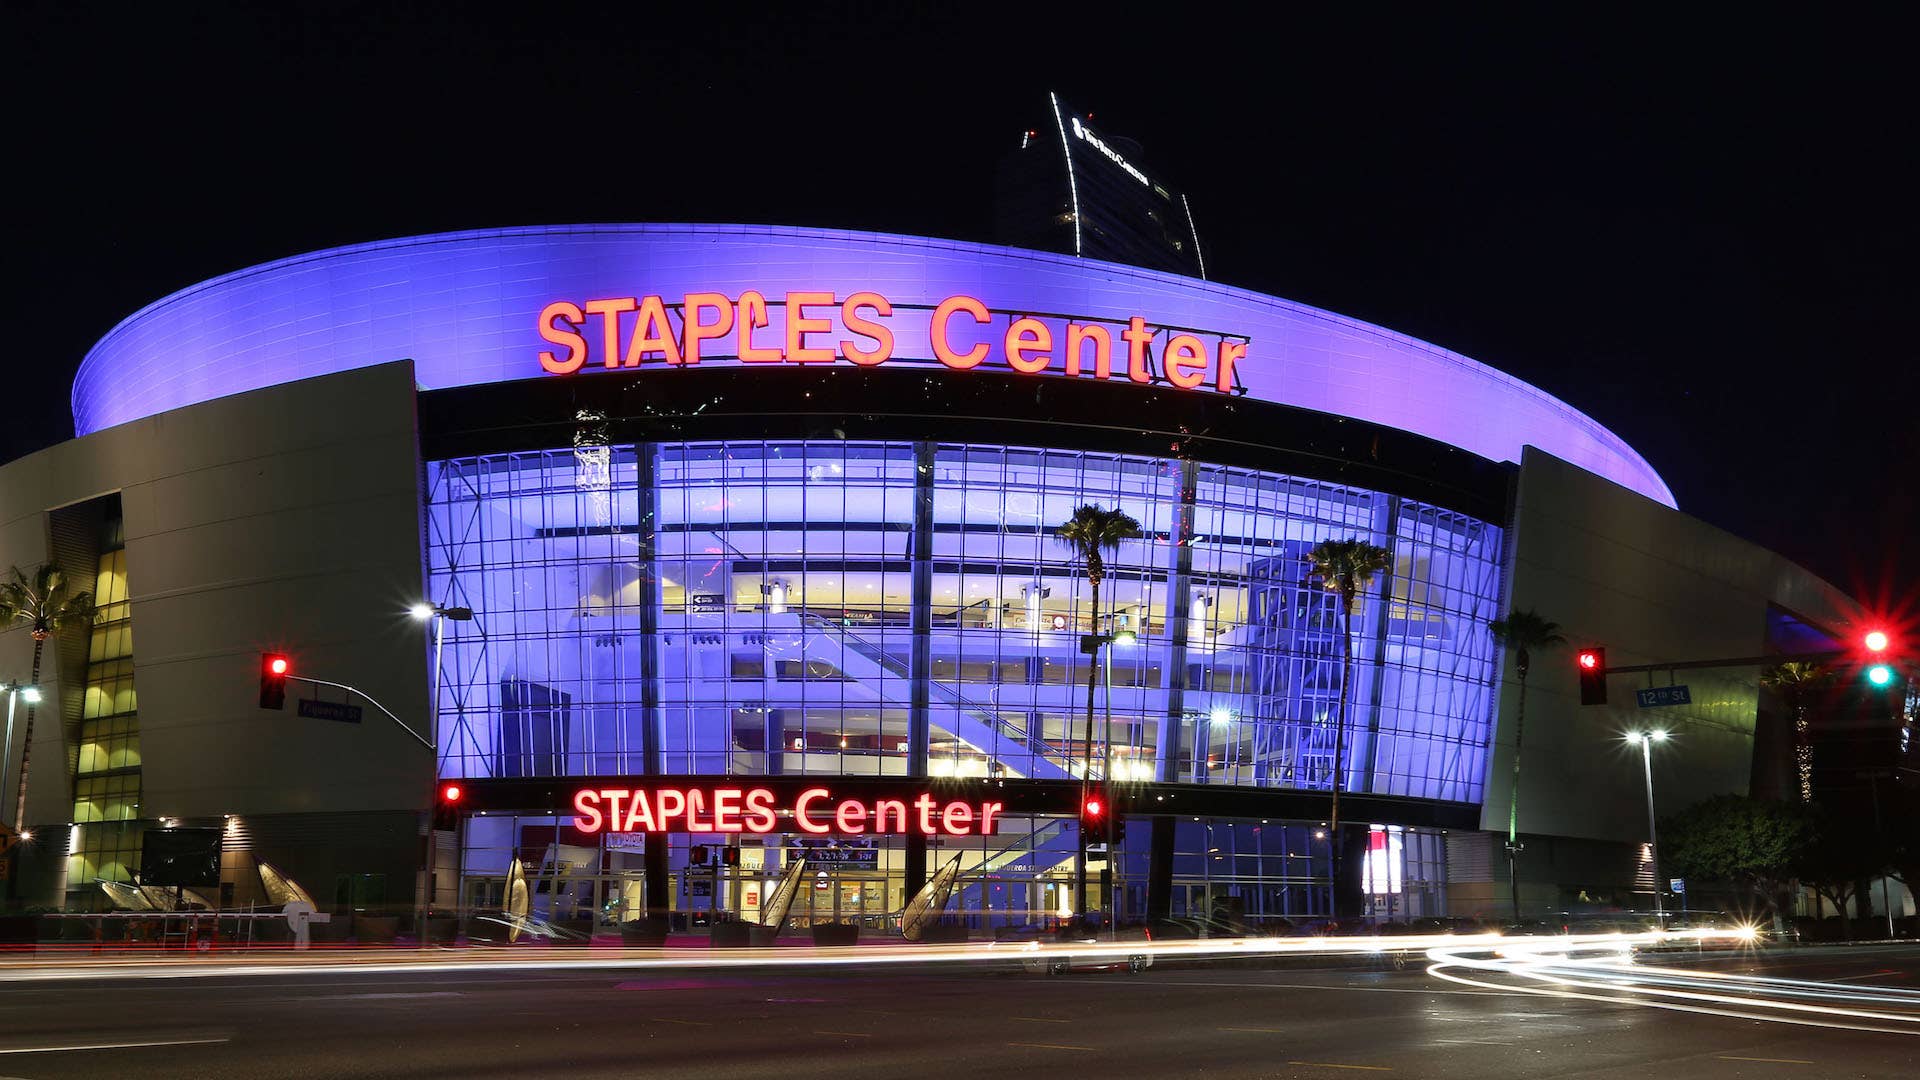 An exterior view of Staples Center in downtown Los Angeles